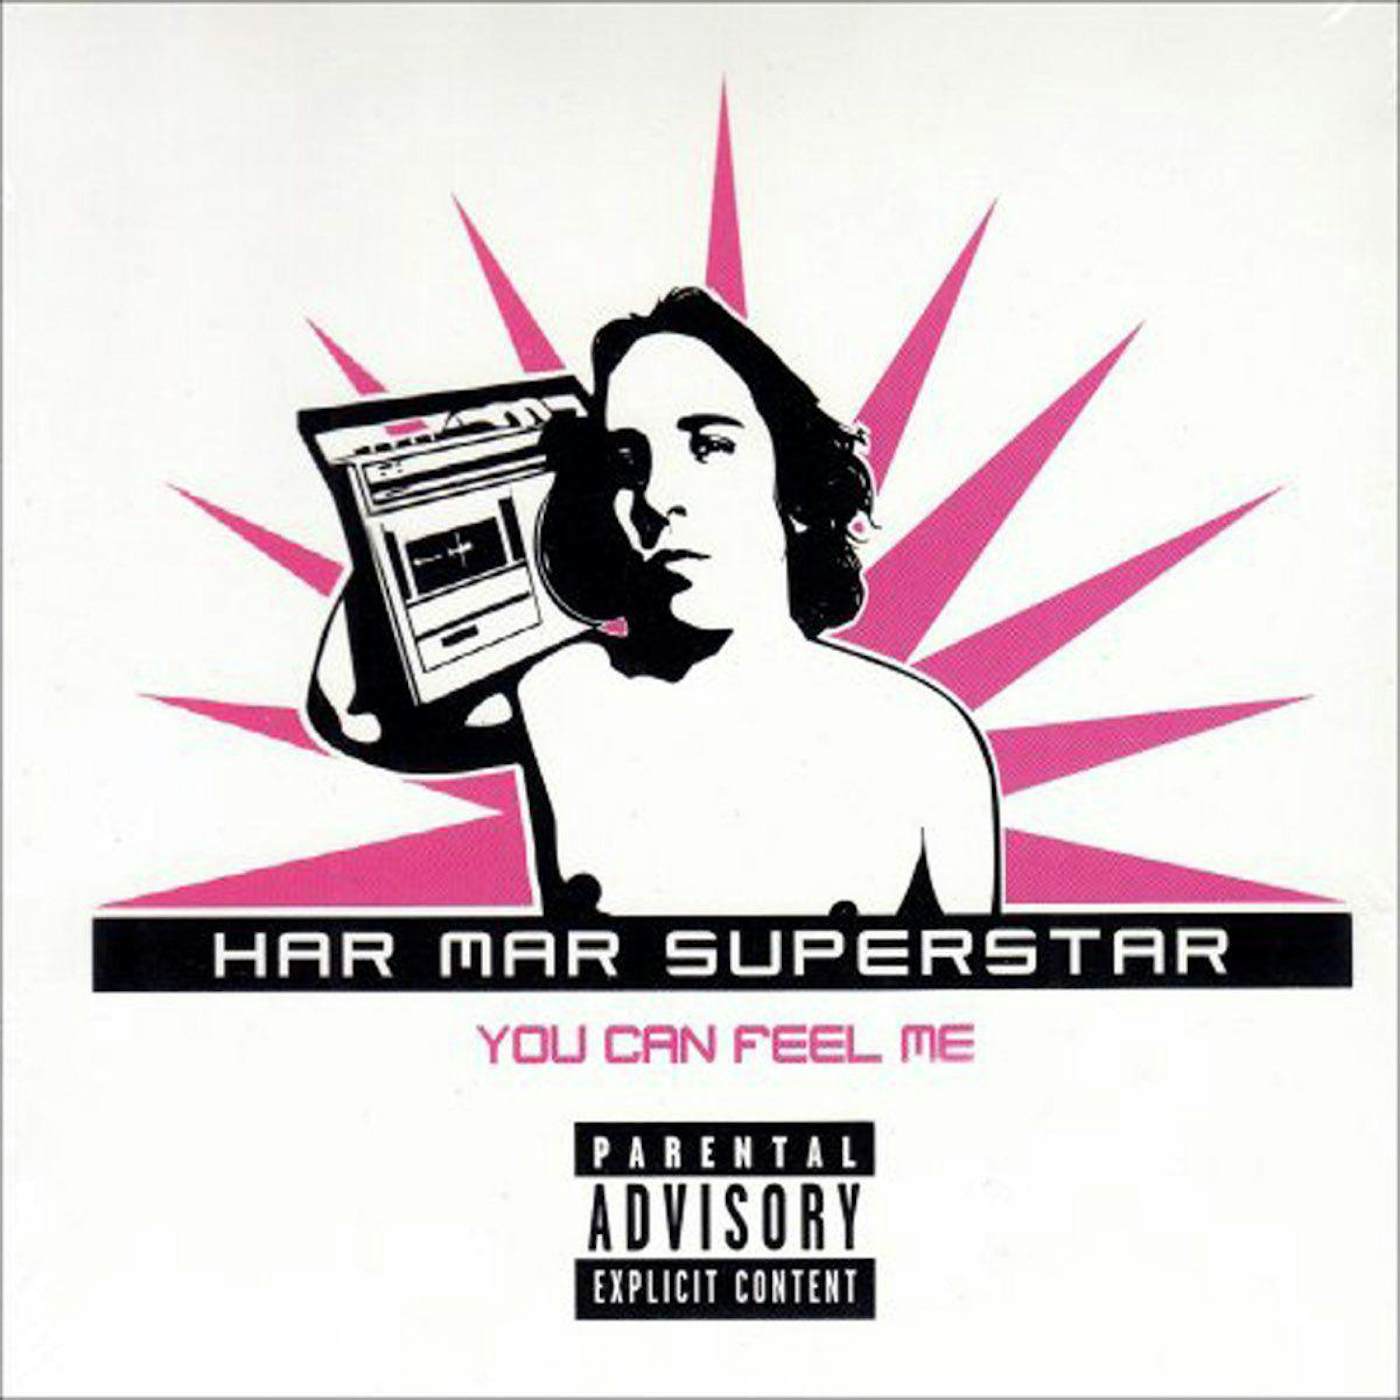 Har Mar Superstar You Can Feel Me - 20th Anniversary Vinyl Record